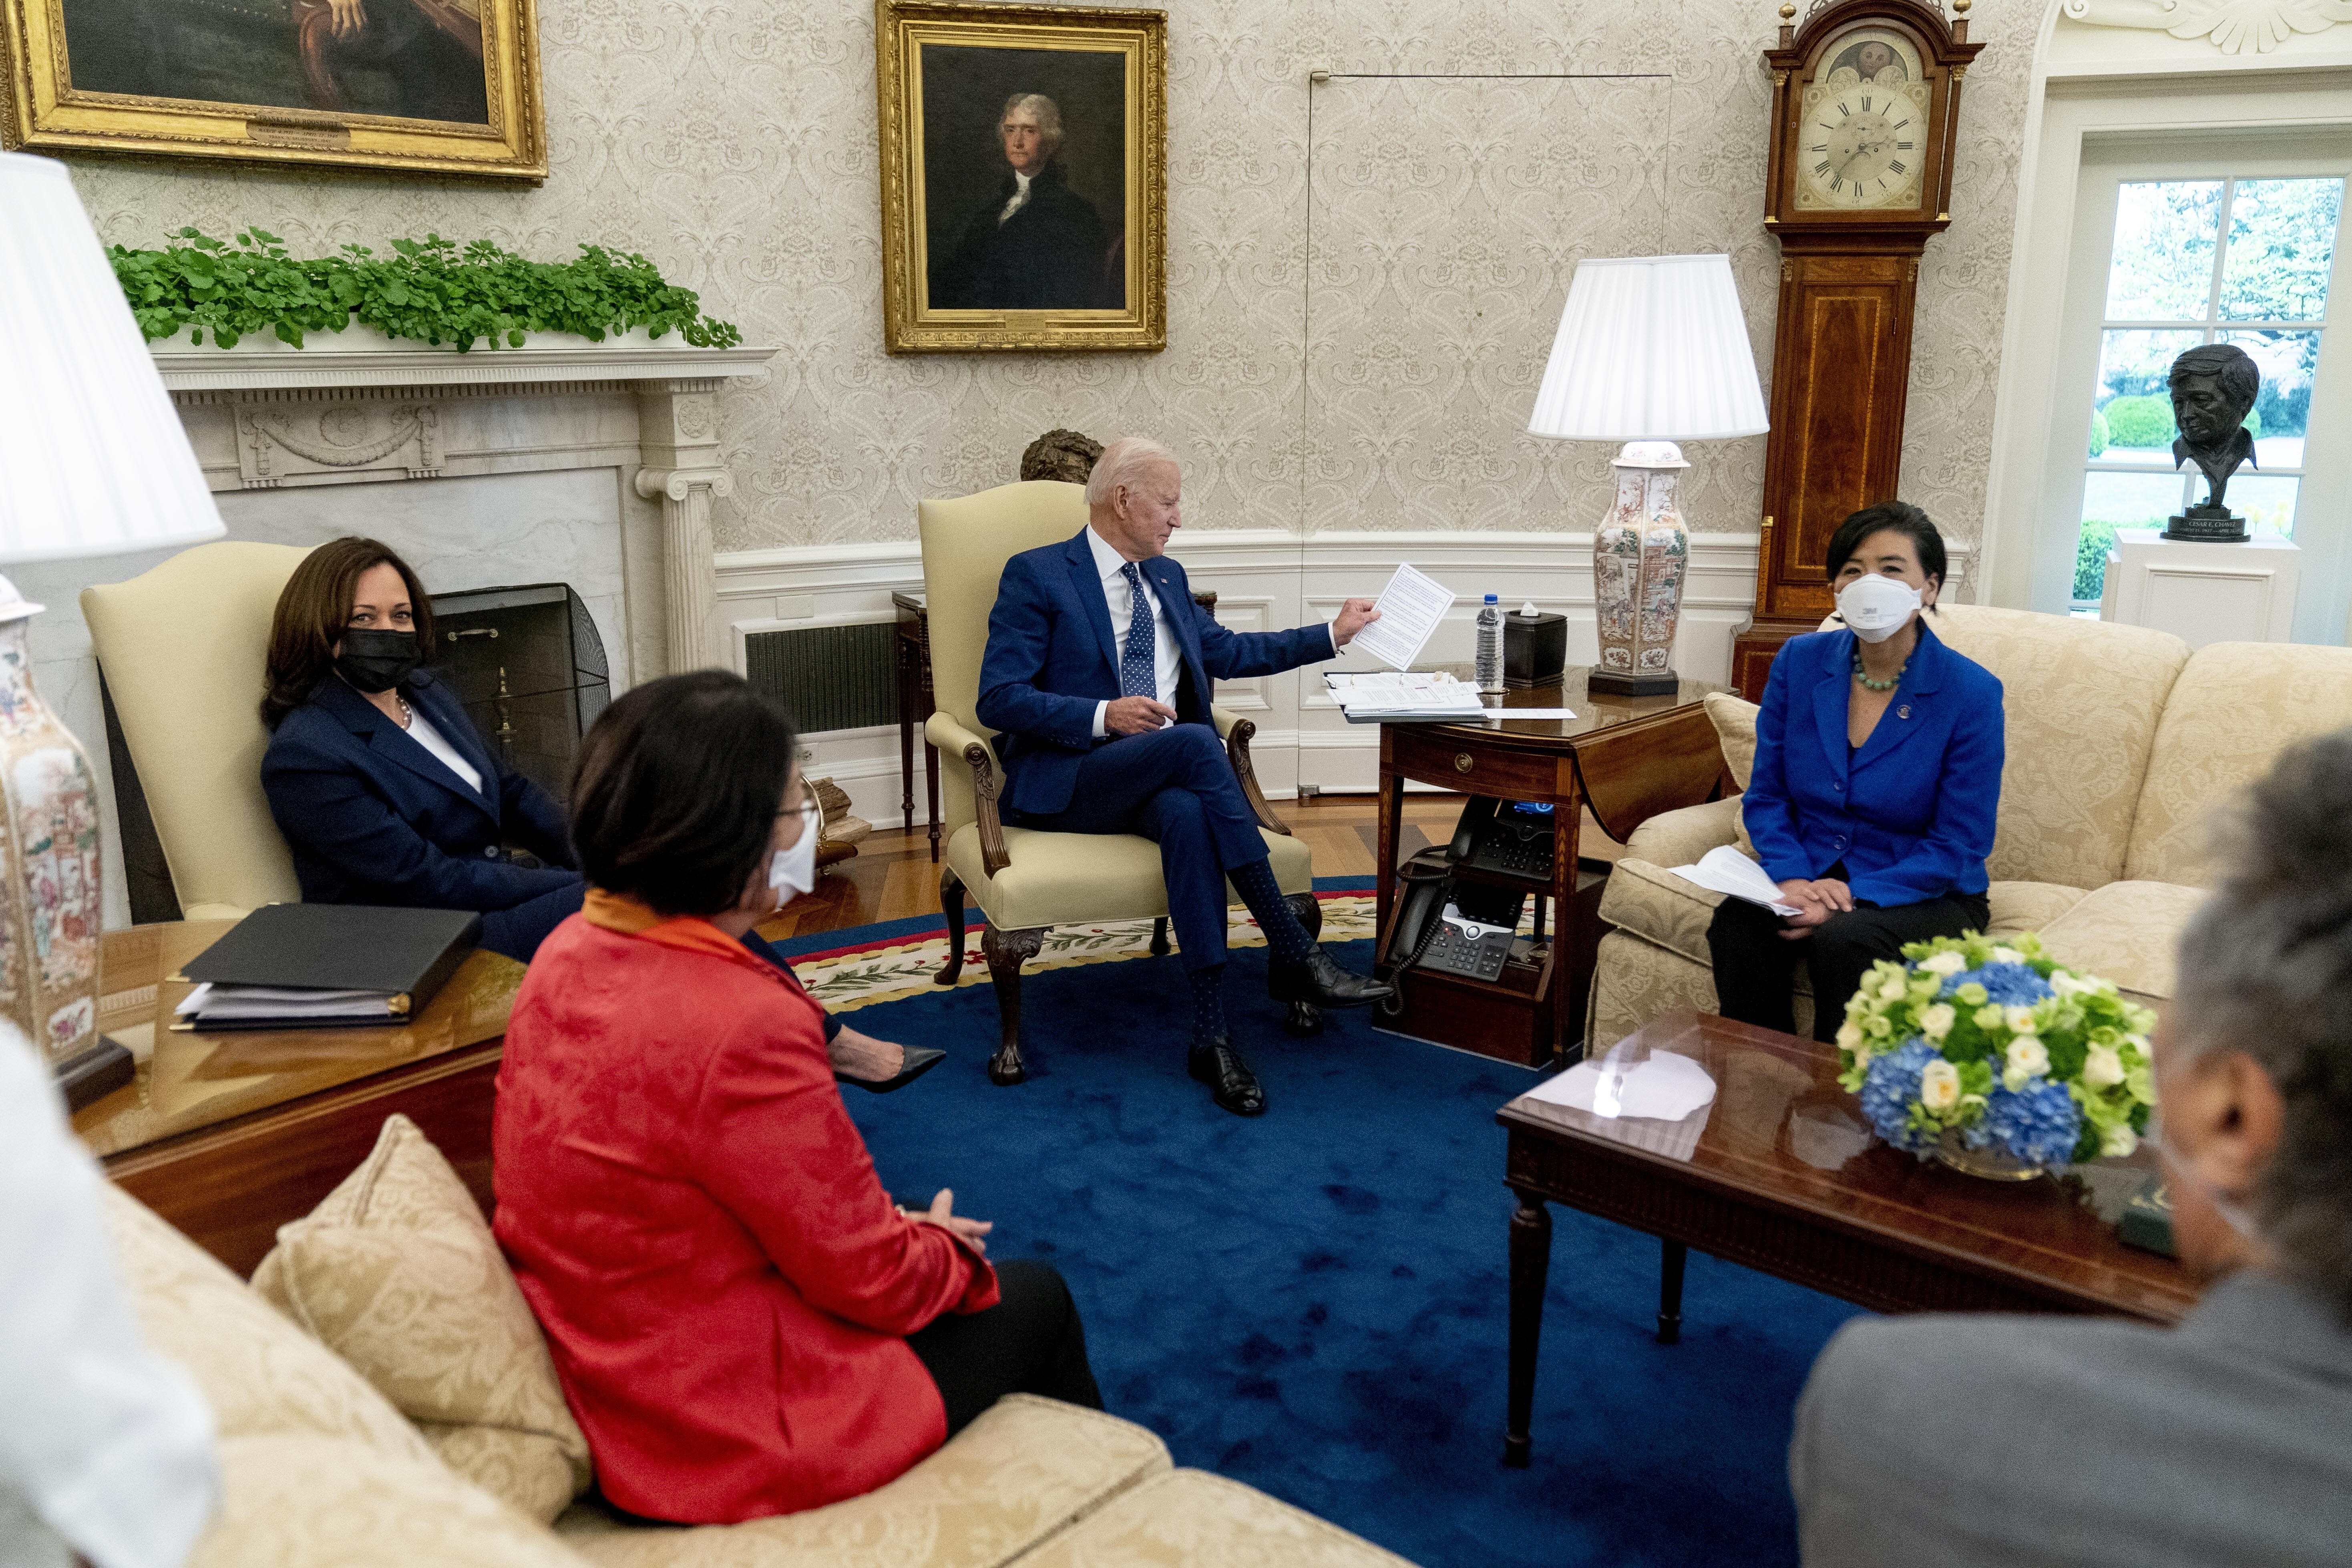 President Joe Biden and Vice-President Kamala Harris meet Senator Mazie Hirono (left), Representative Judy Chu, and other members of the Congressional Asian Pacific American Caucus Executive Committee in the Oval Office at the White House in Washington, on April 15. Photo: AP